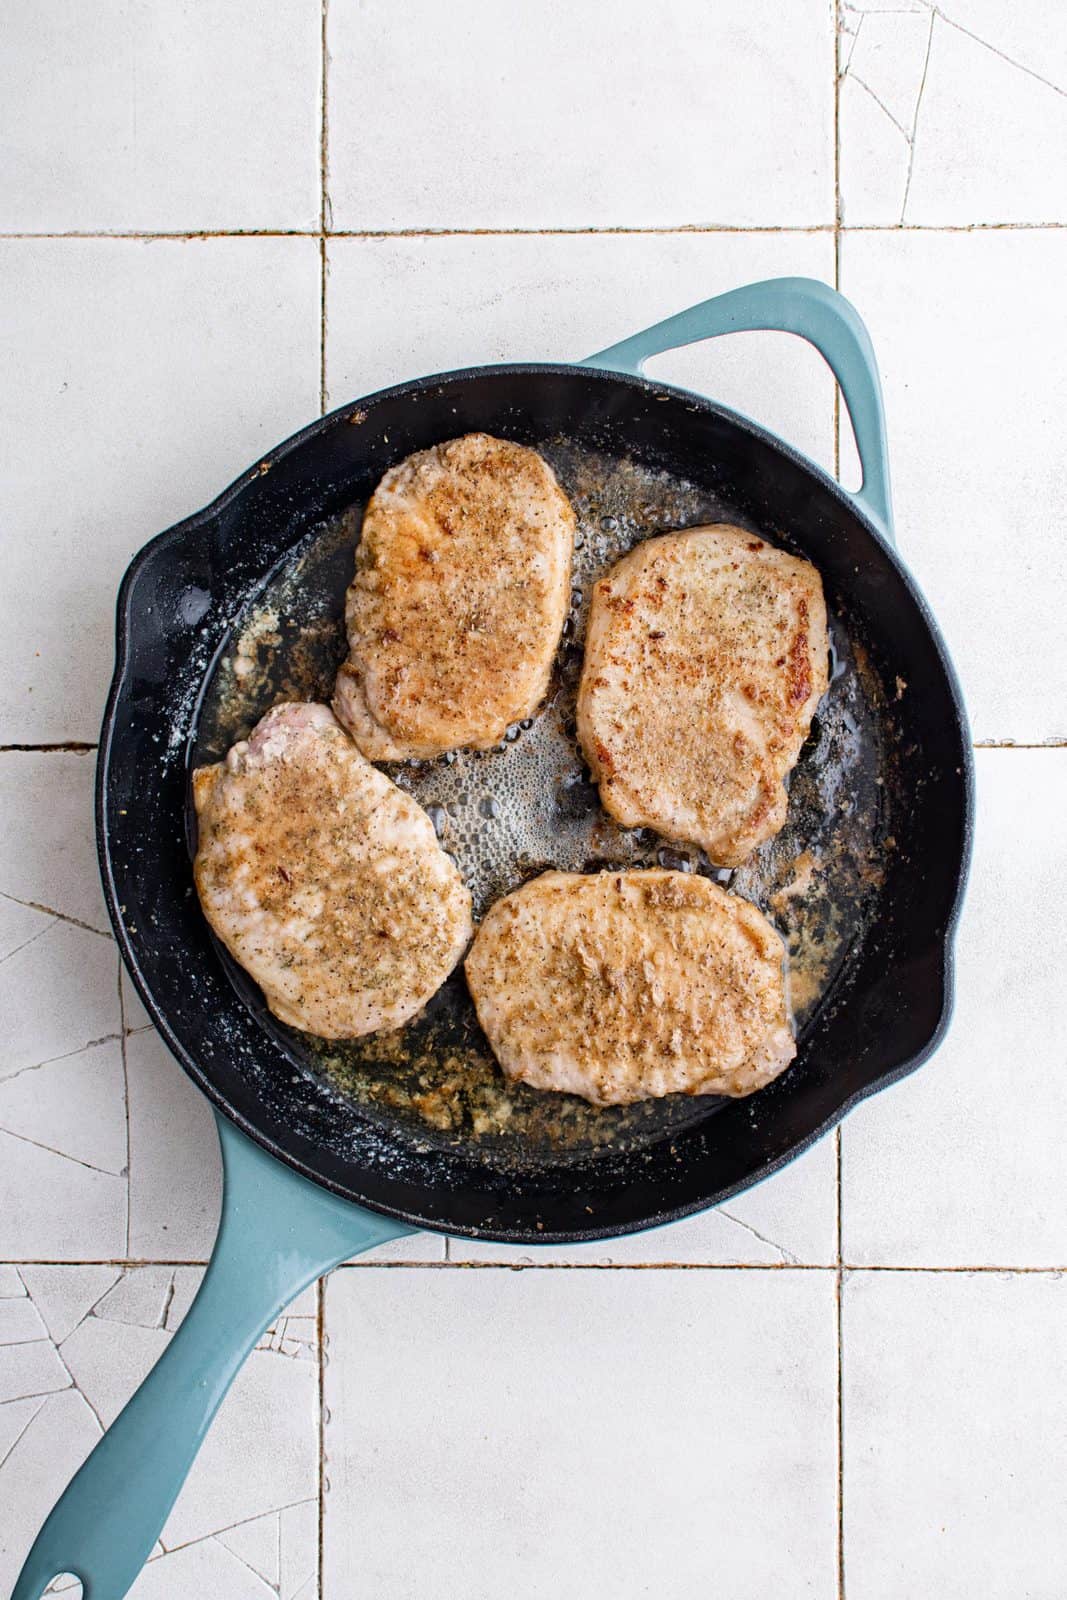 Flipped over pork chops in pan showing browning.